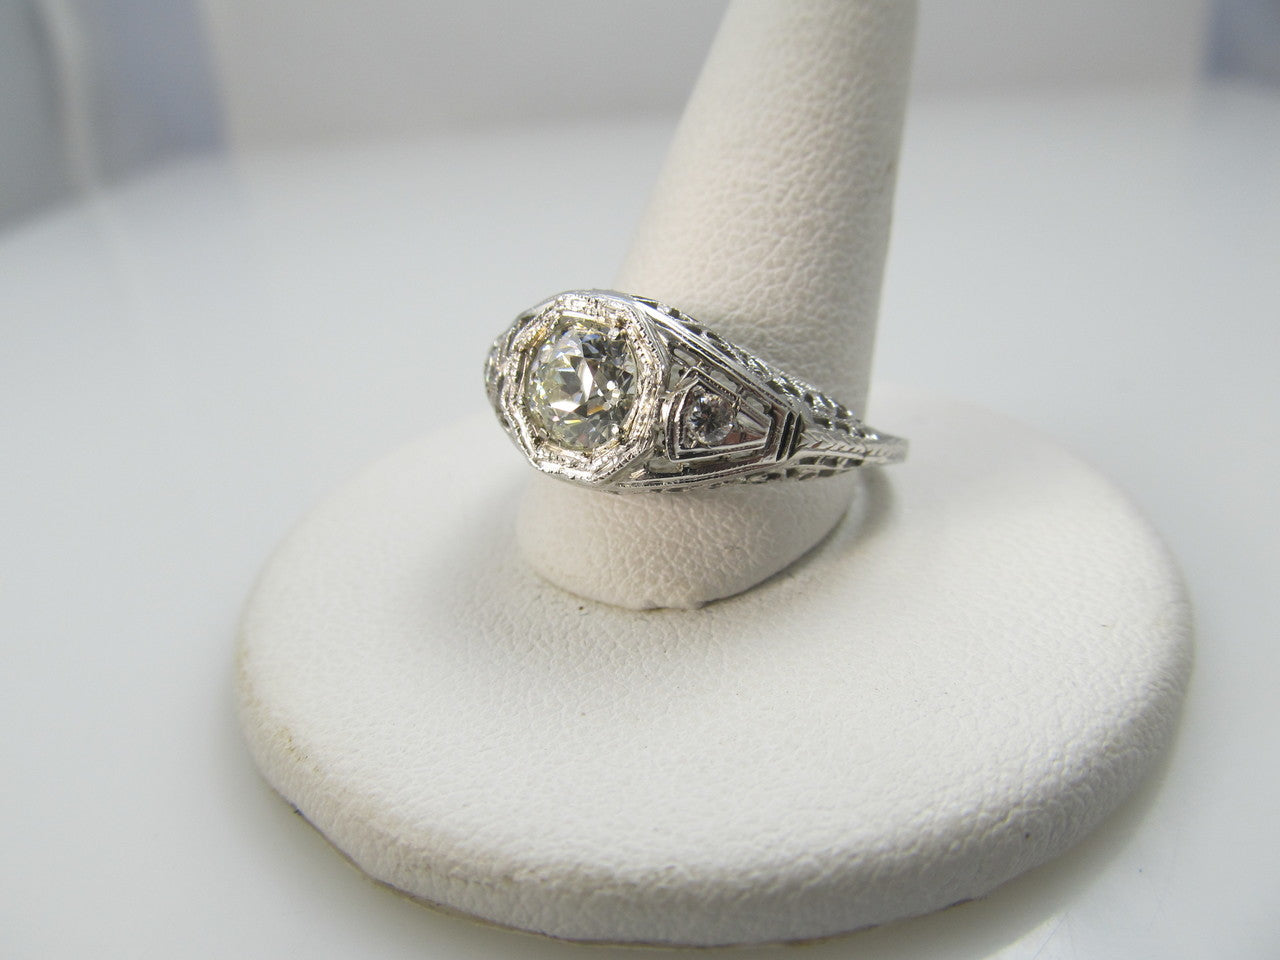 18k White Gold Filigree Engagement Ring With A .75ct Center Diamond, Vs2, F-g